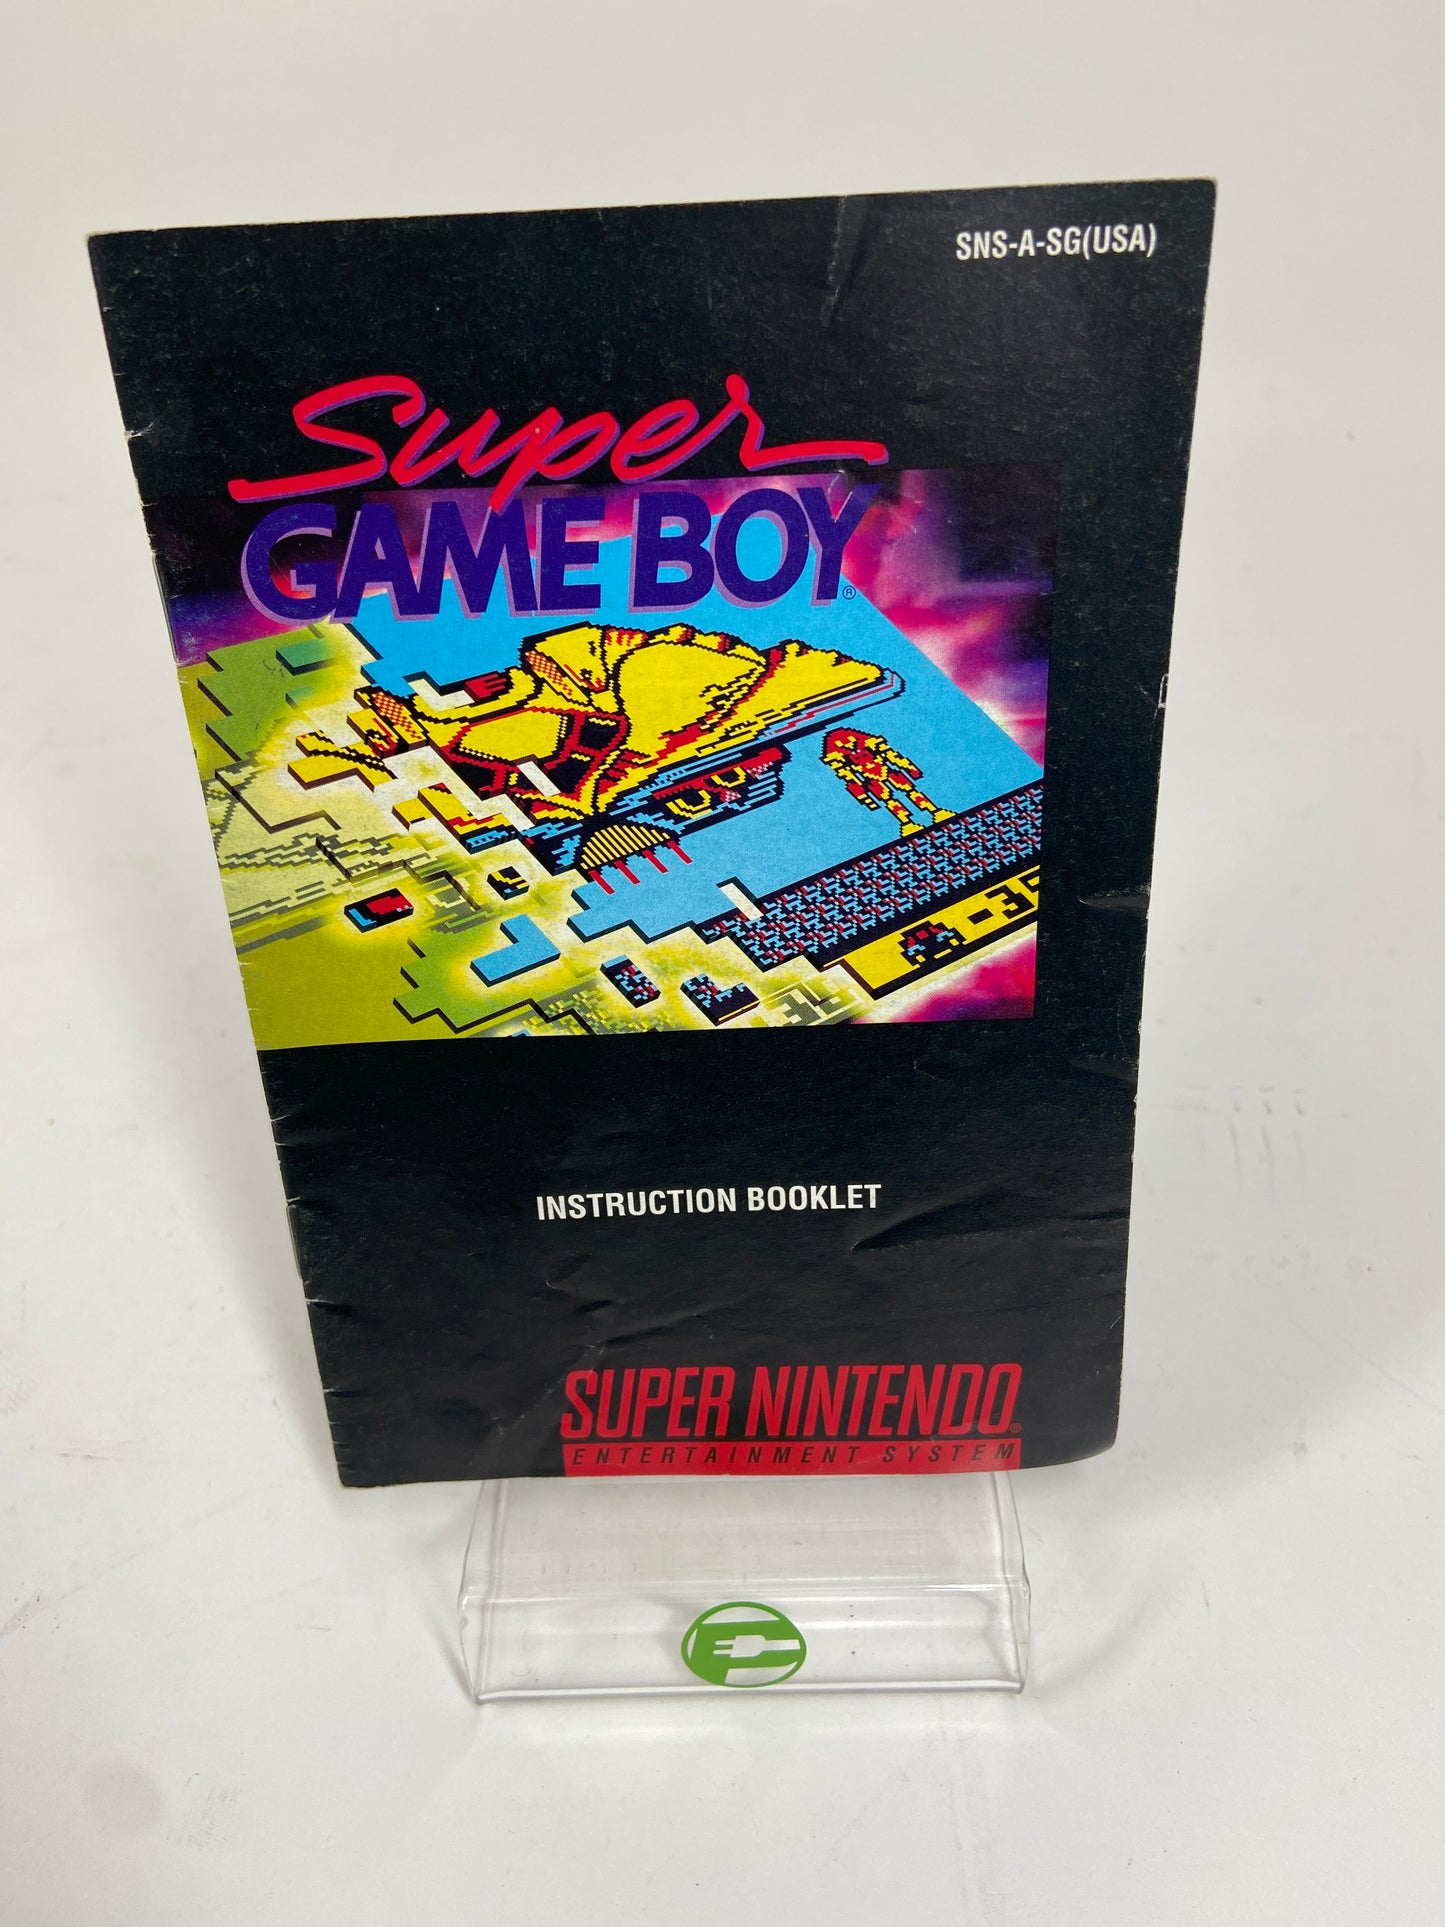 Nintendo Super Game Boy Adapter Gray SNS-027 with Manual